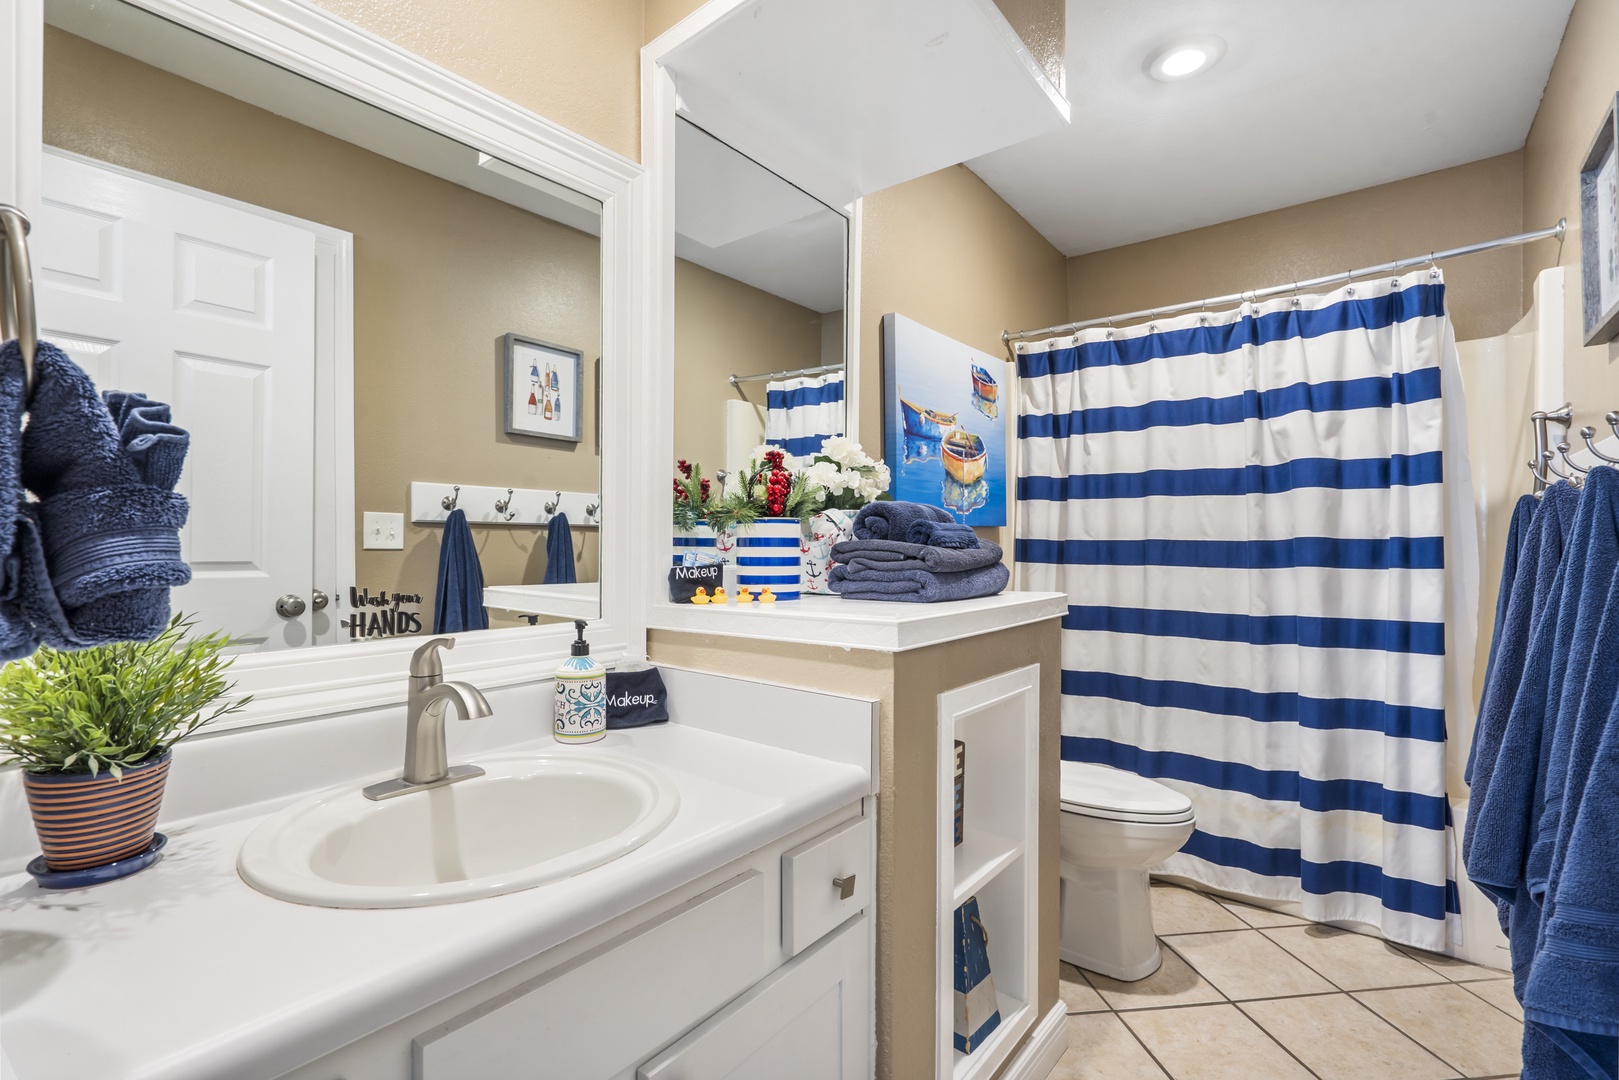 This ensuite links to the living area, featuring a single vanity & shower/tub combo